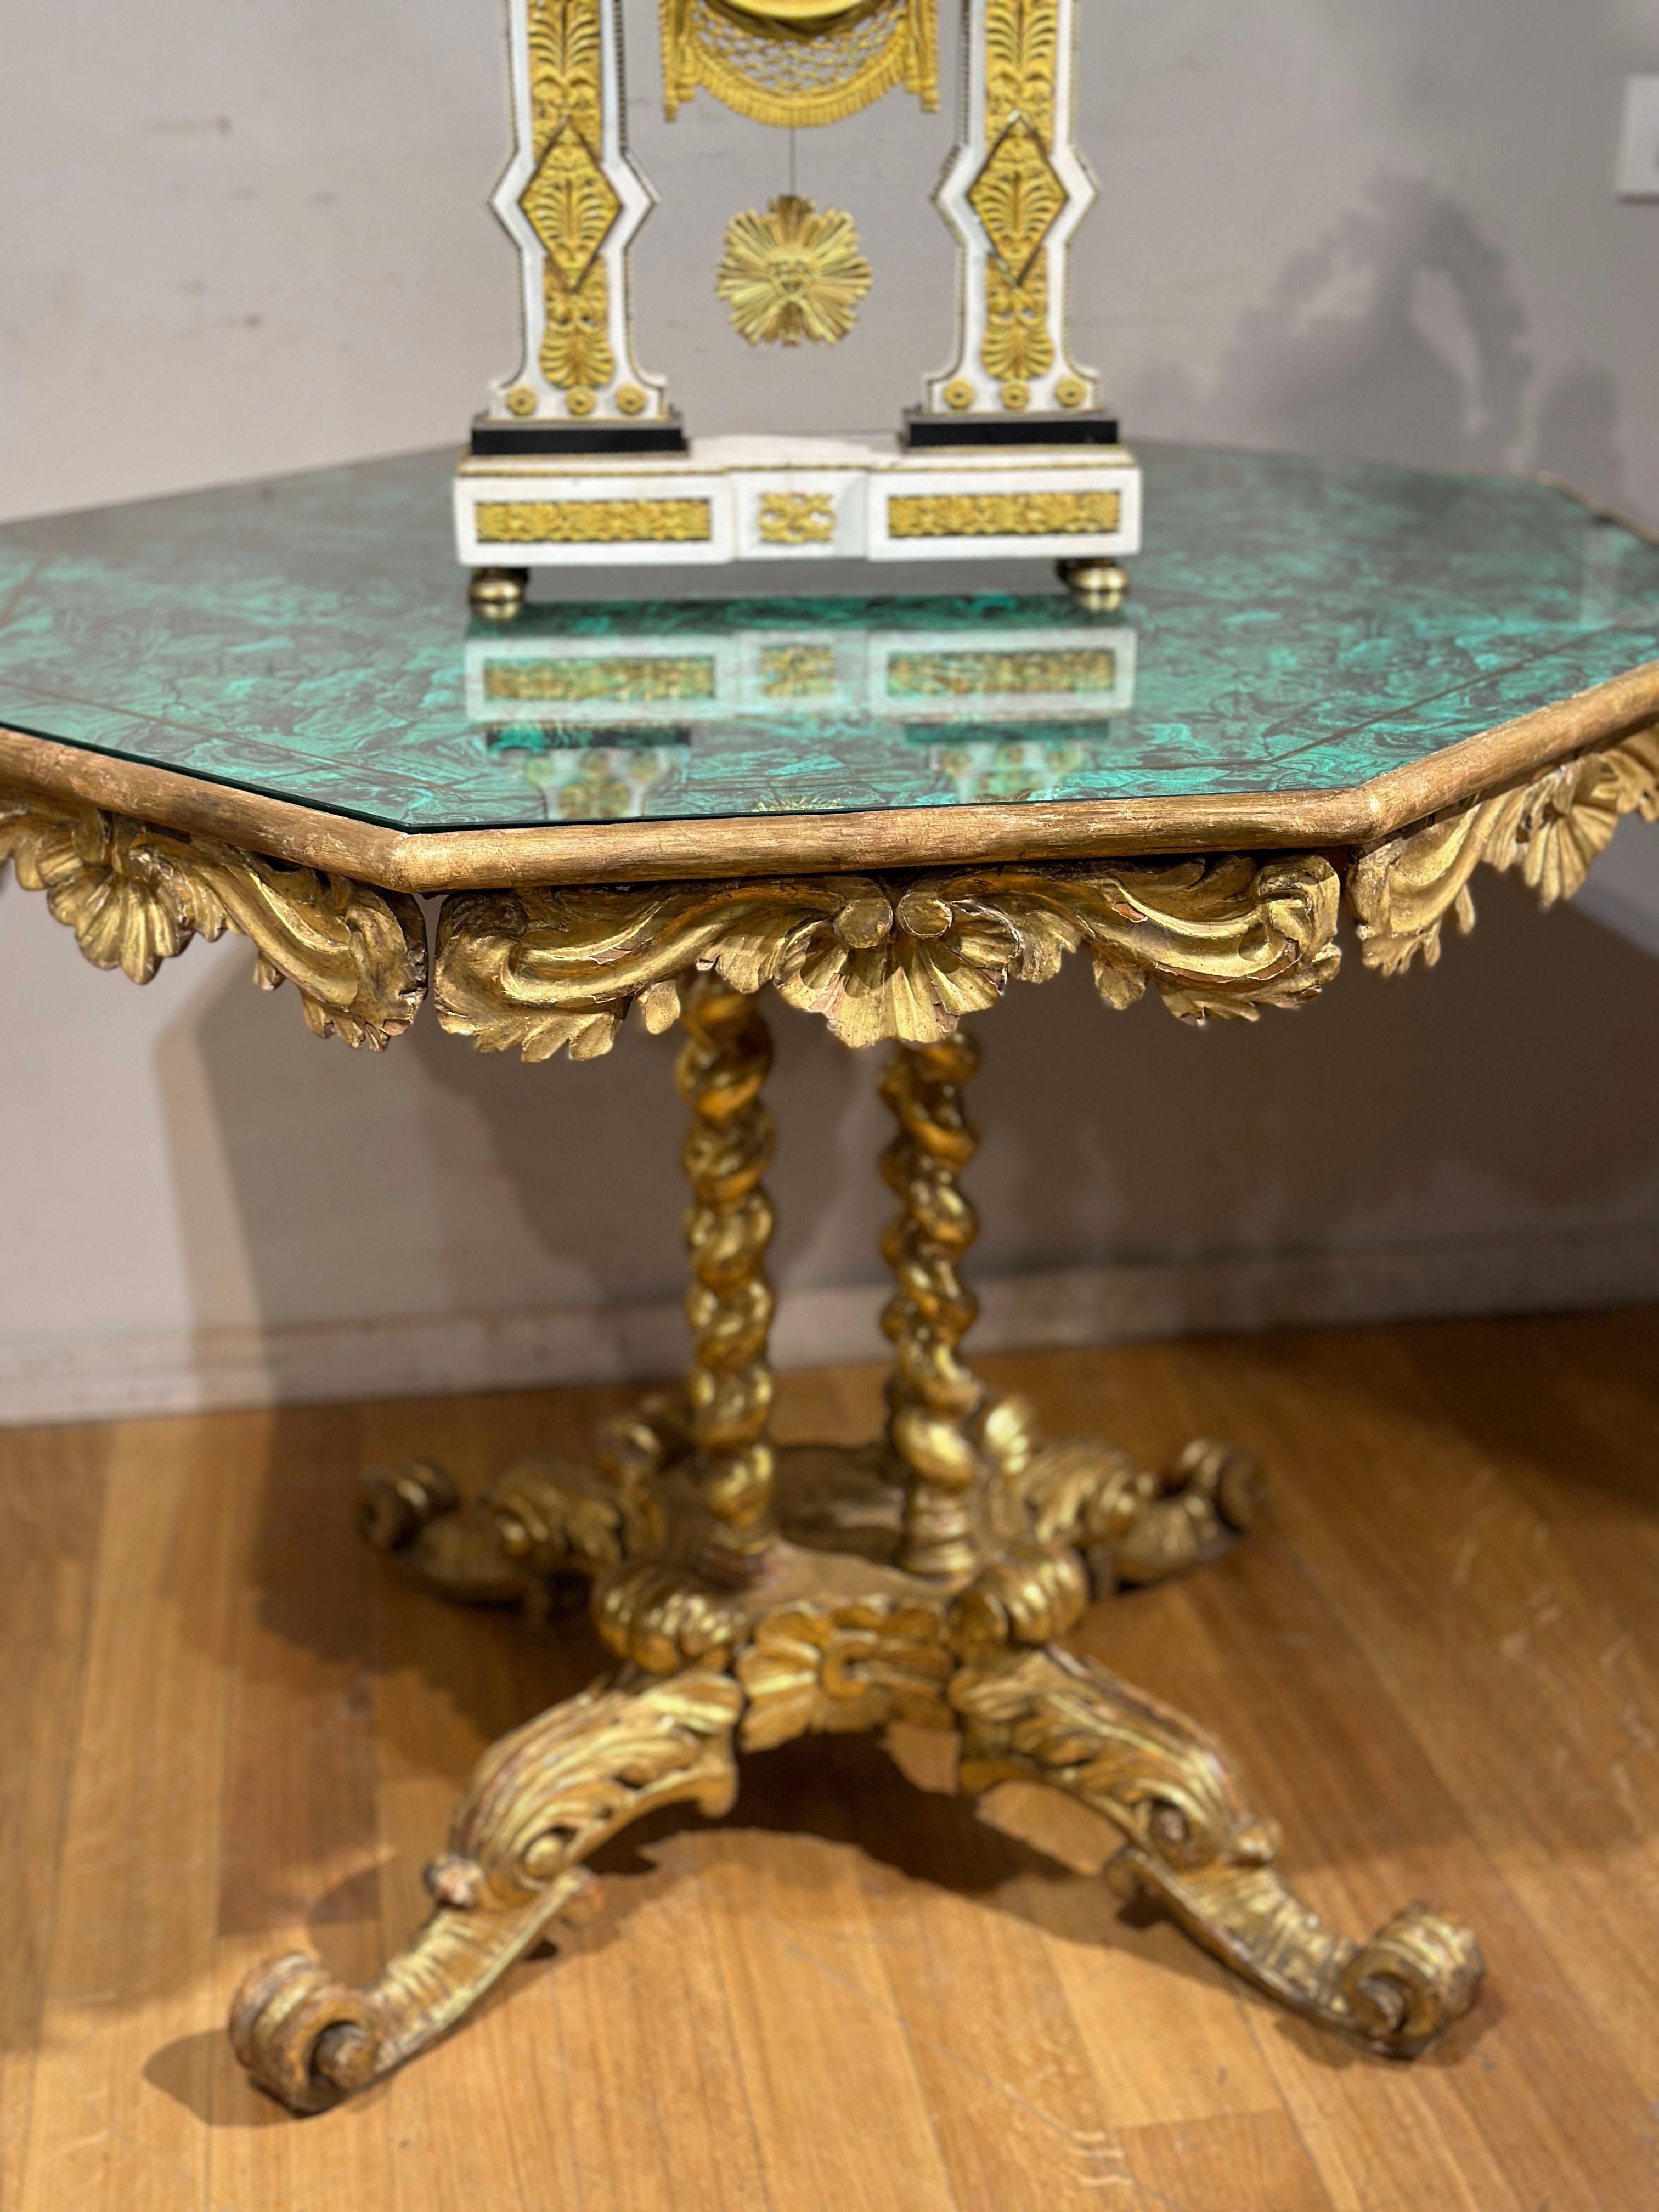 EARLY 19th CENTURY GILDED WOOD TABLE WITH SIMILAR MALACHITE FABRIC im Angebot 4